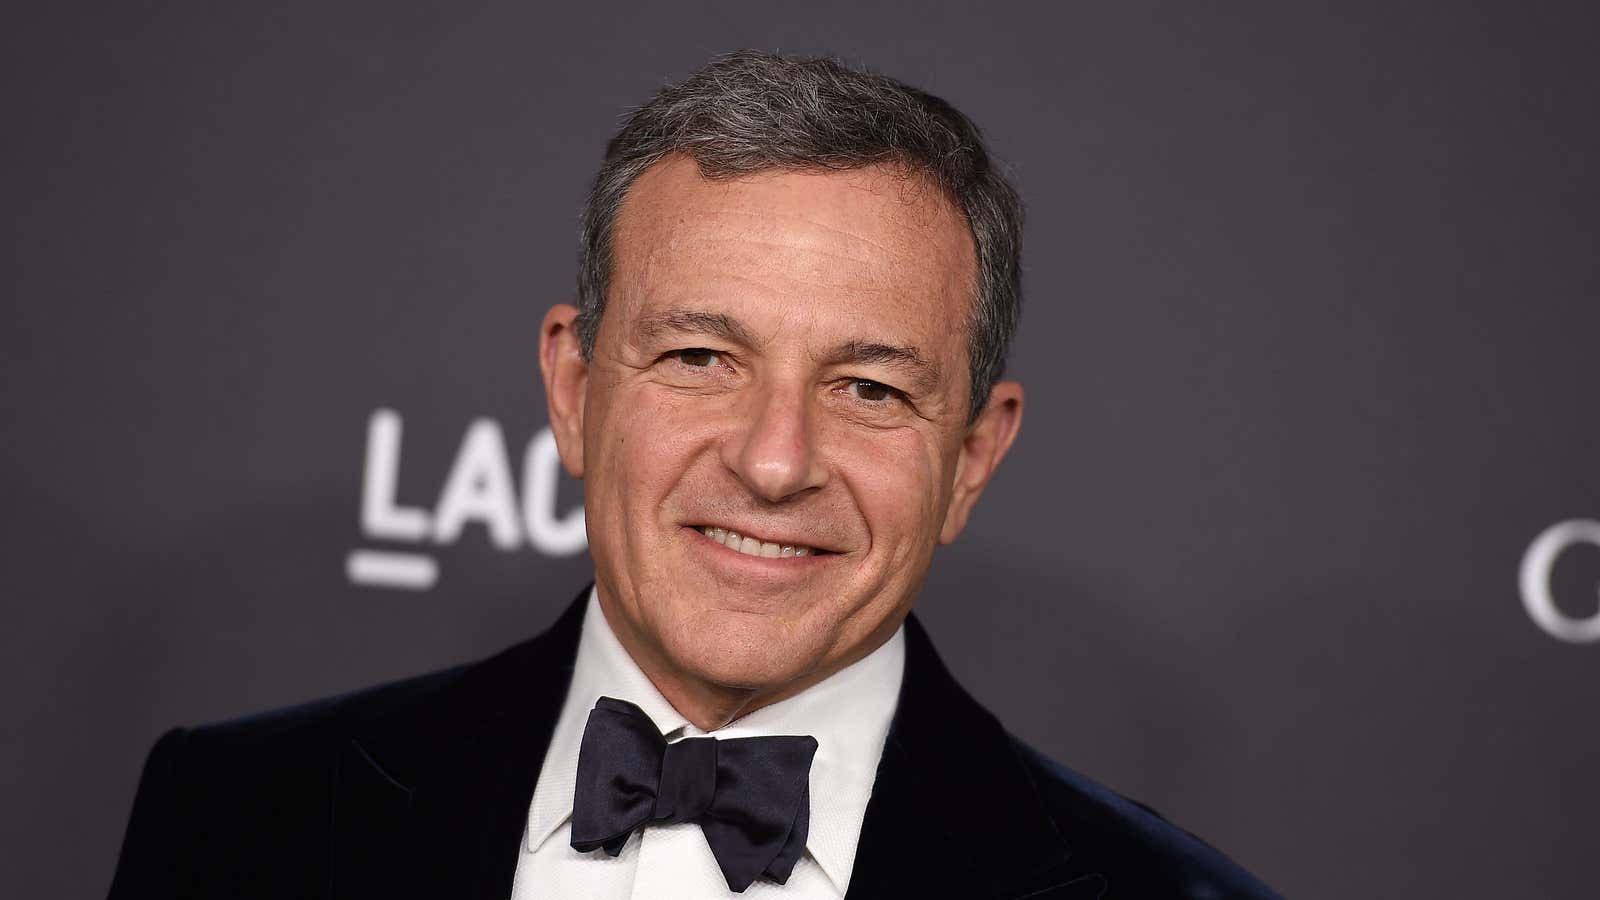 Disney CEO Bob Iger is the man of the hour.